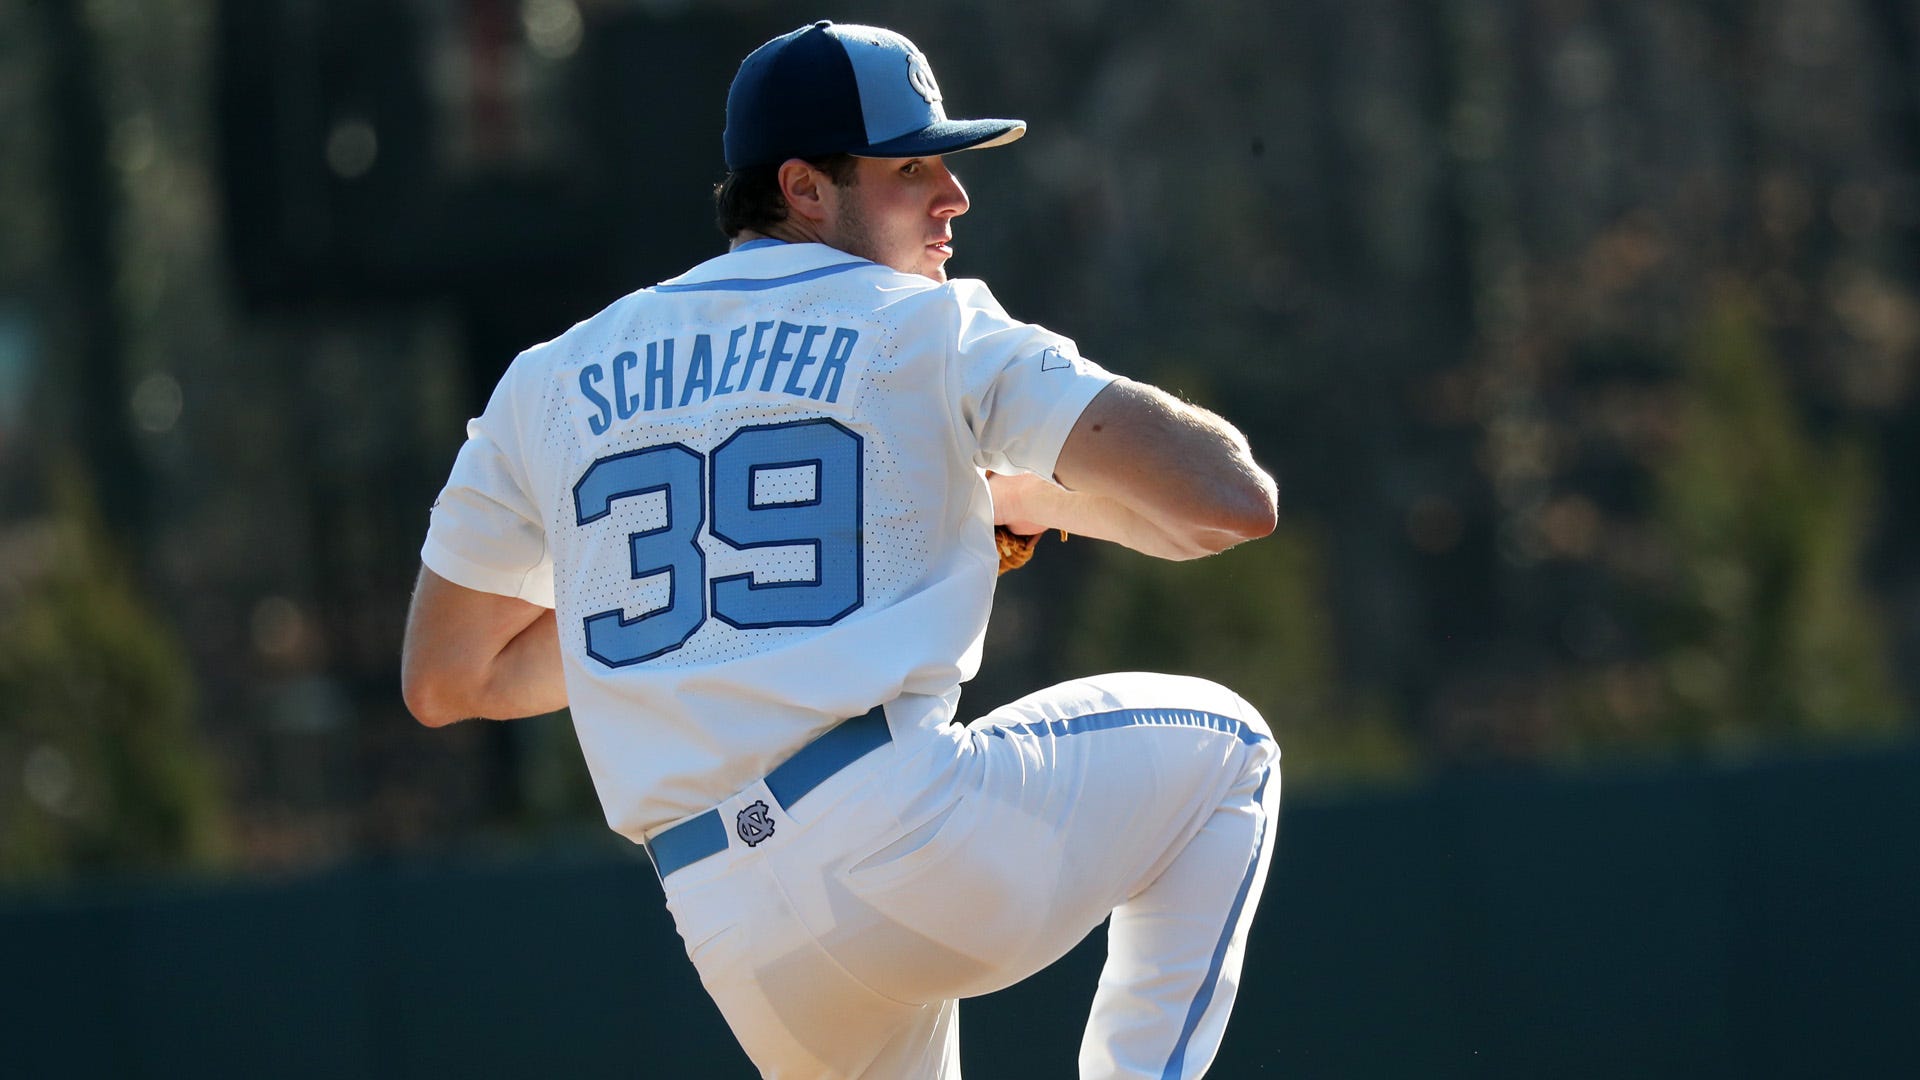 UNC baseball welcomes high expectations after strong finish to last season  - The Daily Tar Heel